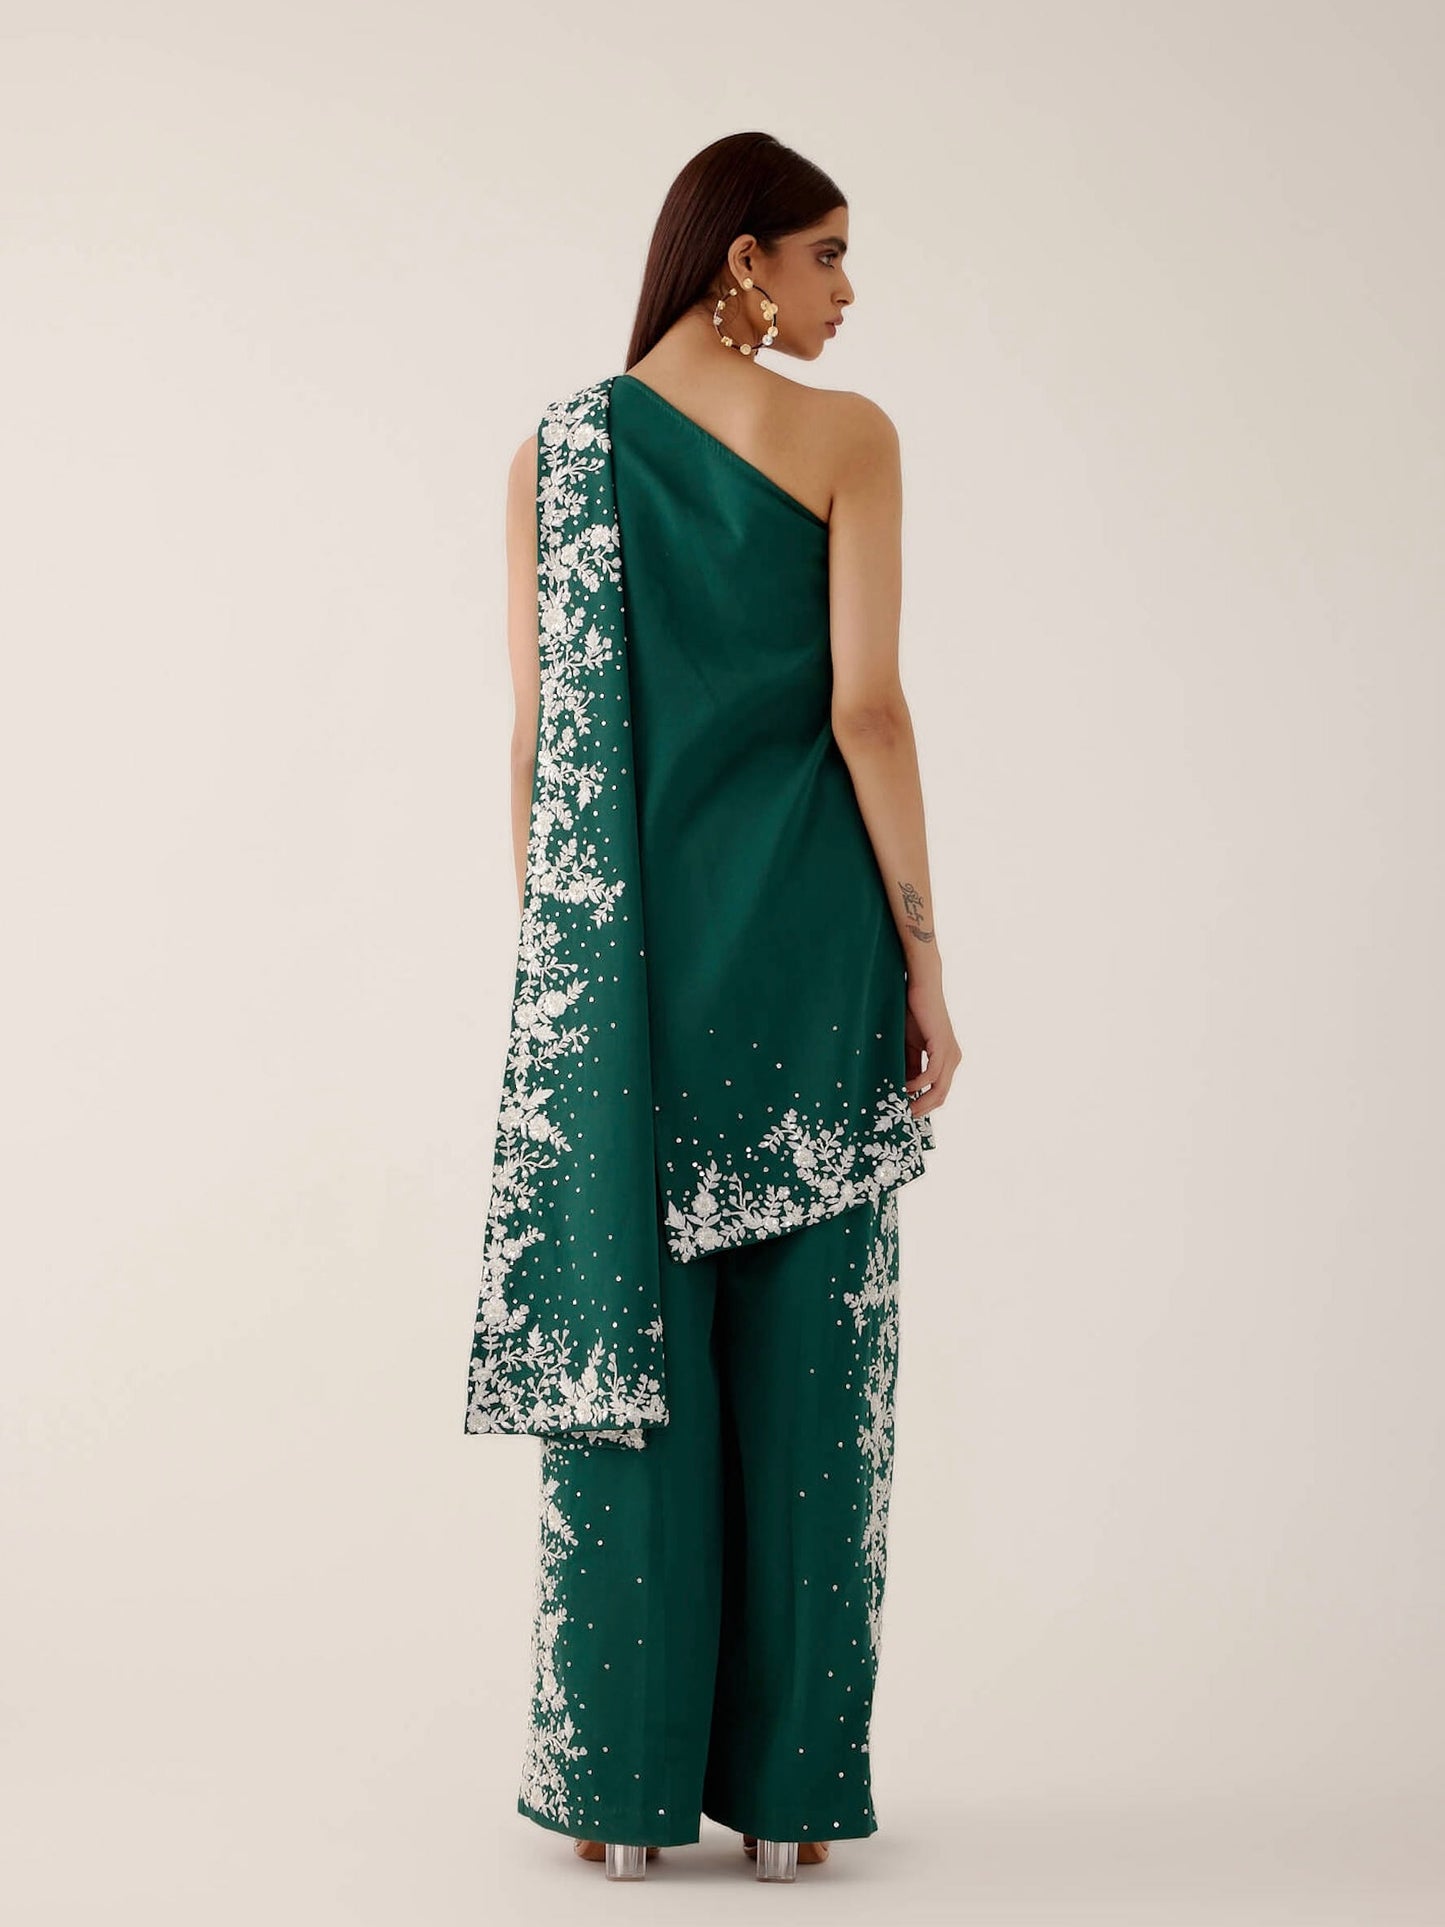 The Cleo Set consists of one shoulder top with hand-embroidered, high-waisted pants, and a detachable drape.